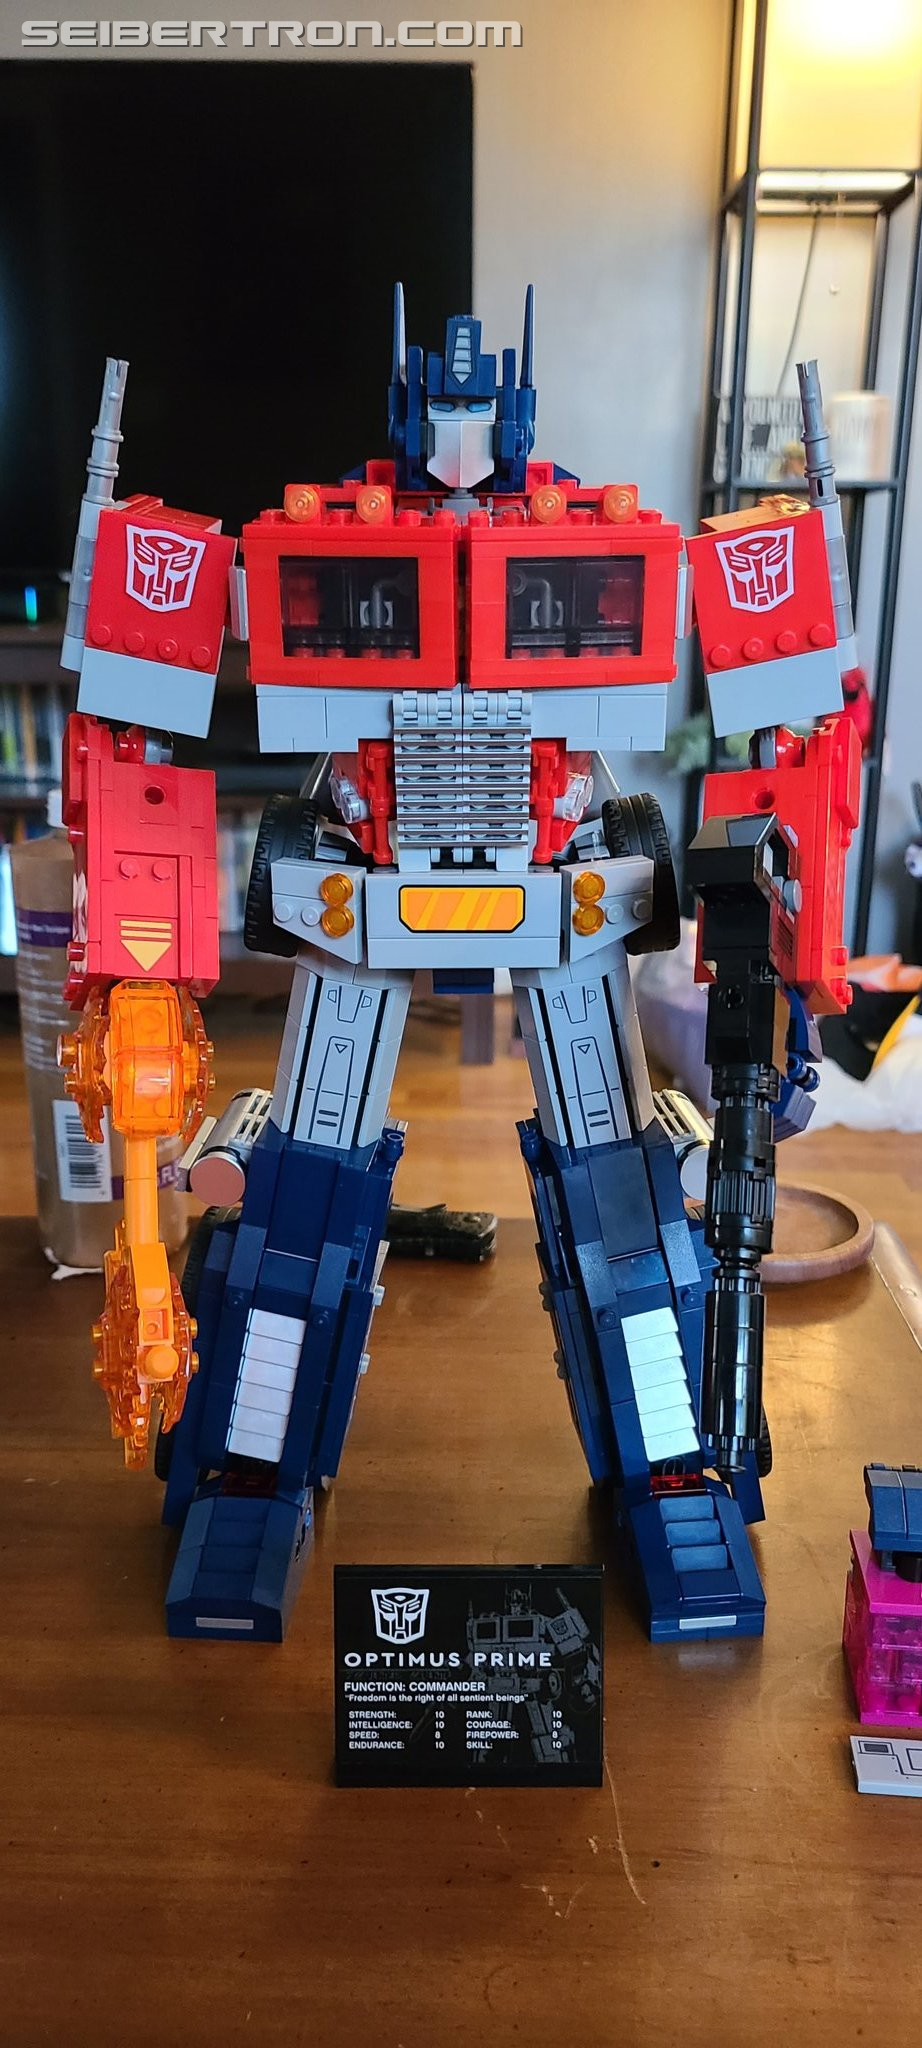 10 of 2022 - Share with us your Top 10 Transformers Purchases of 2022